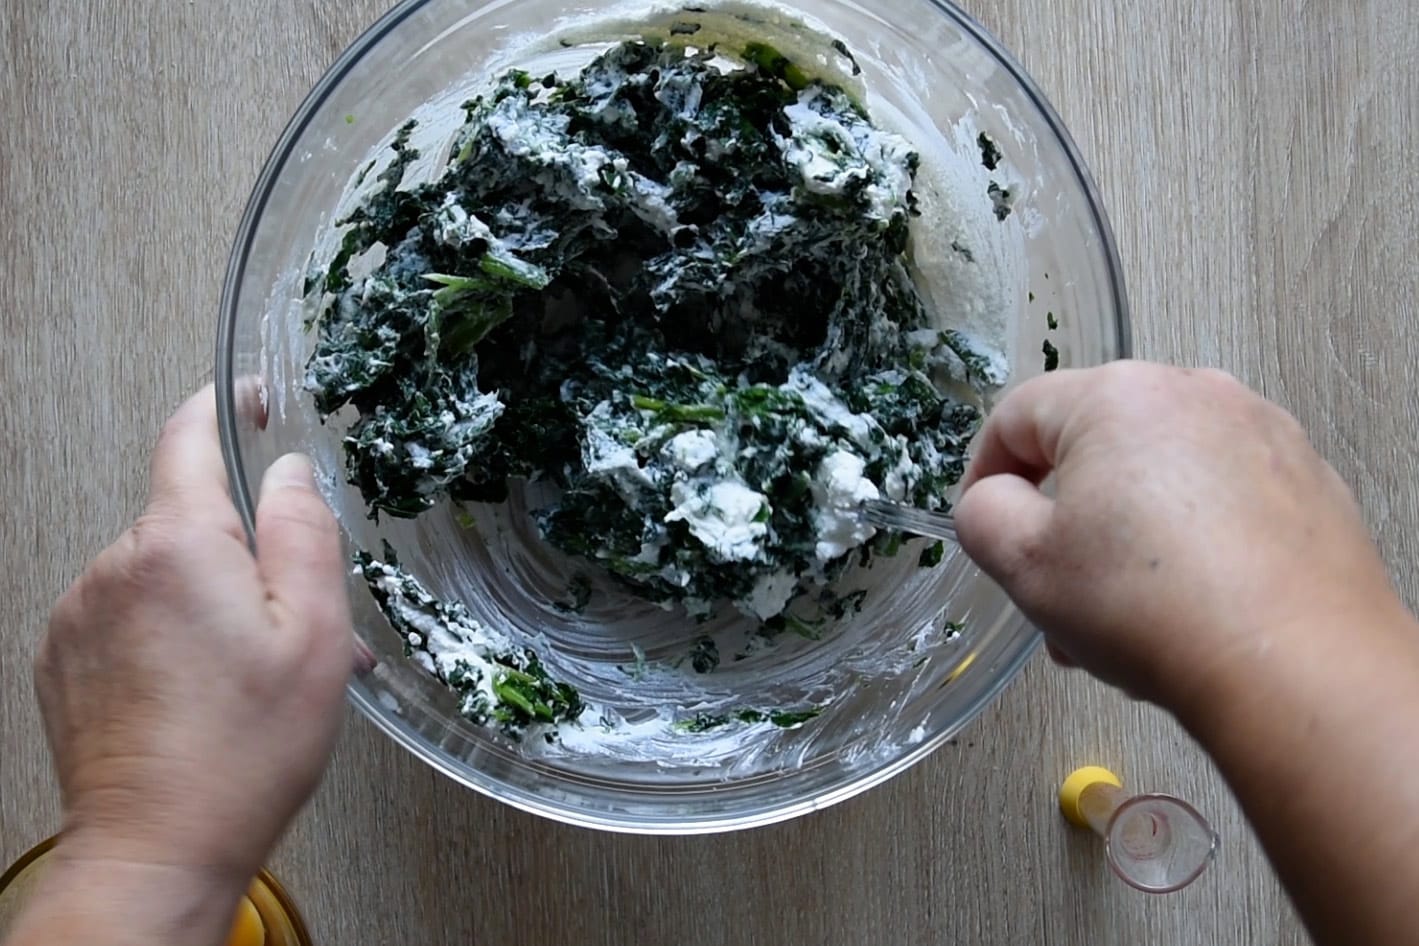 Mixing the ricotta with the spinach